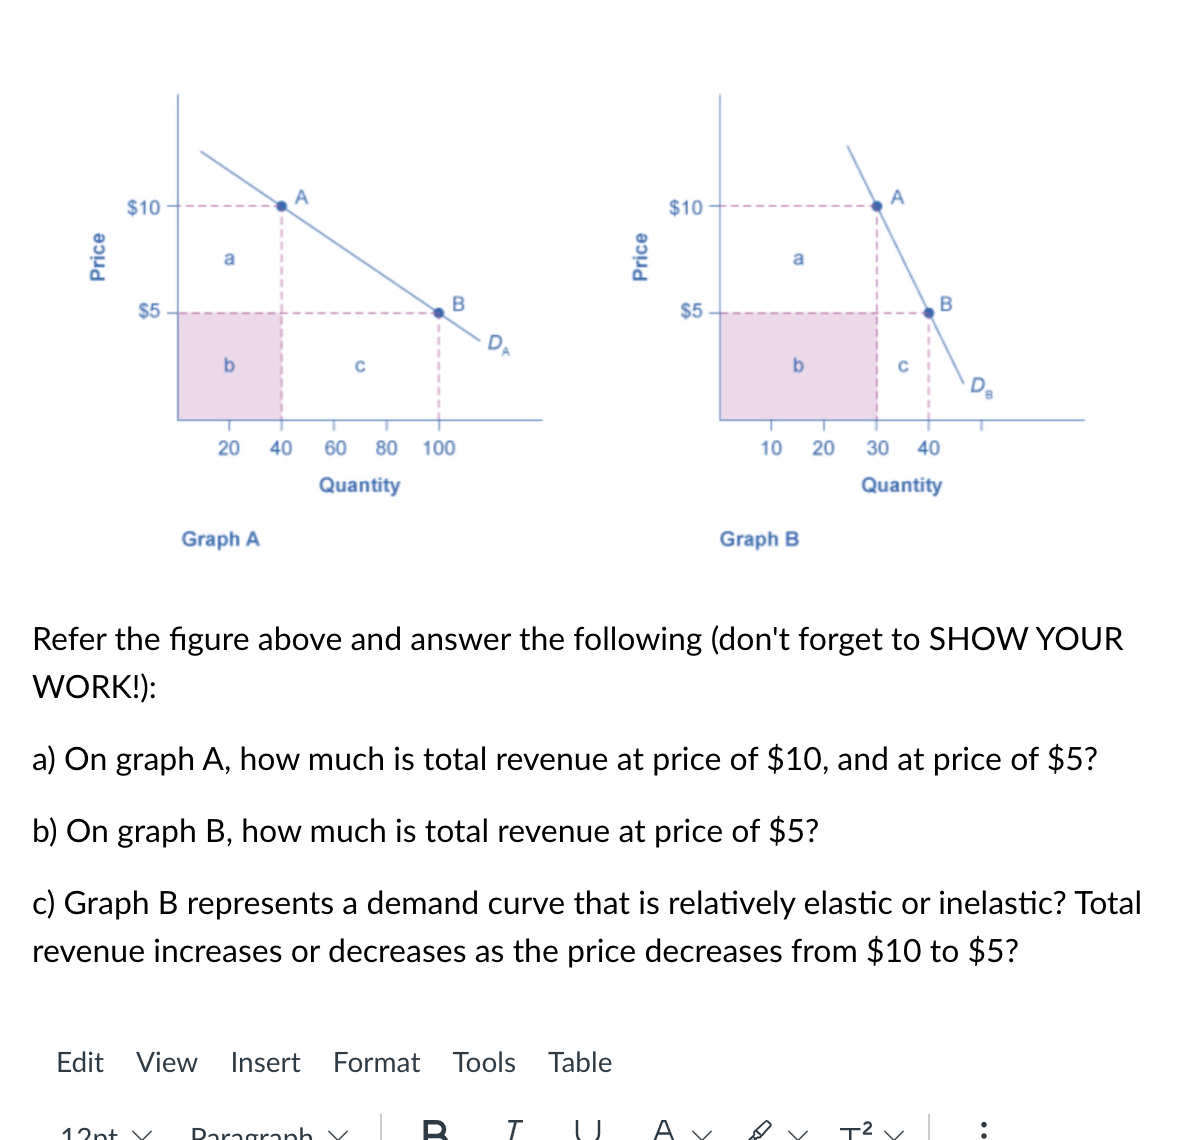 A
A
$10
$10
a
a
$5
$5
20
40
60
80
100
10
20
30
40
Quantity
Quantity
Graph A
Graph B
Refer the figure above and answer the following (don't forget to SHOW YOUR
WORK!):
a) On graph A, how much is total revenue at price of $10, and at price of $5?
b) On graph B, how much is total revenue at price of $5?
c) Graph B represents a demand curve that is relatively elastic or inelastic? Total
revenue increases or decreases as the price decreases from $10 to $5?
Edit
View
Insert
Format Tools Table
B
U
A Y
T2 Y
12pt Y
Daragraph v
Price
Price
